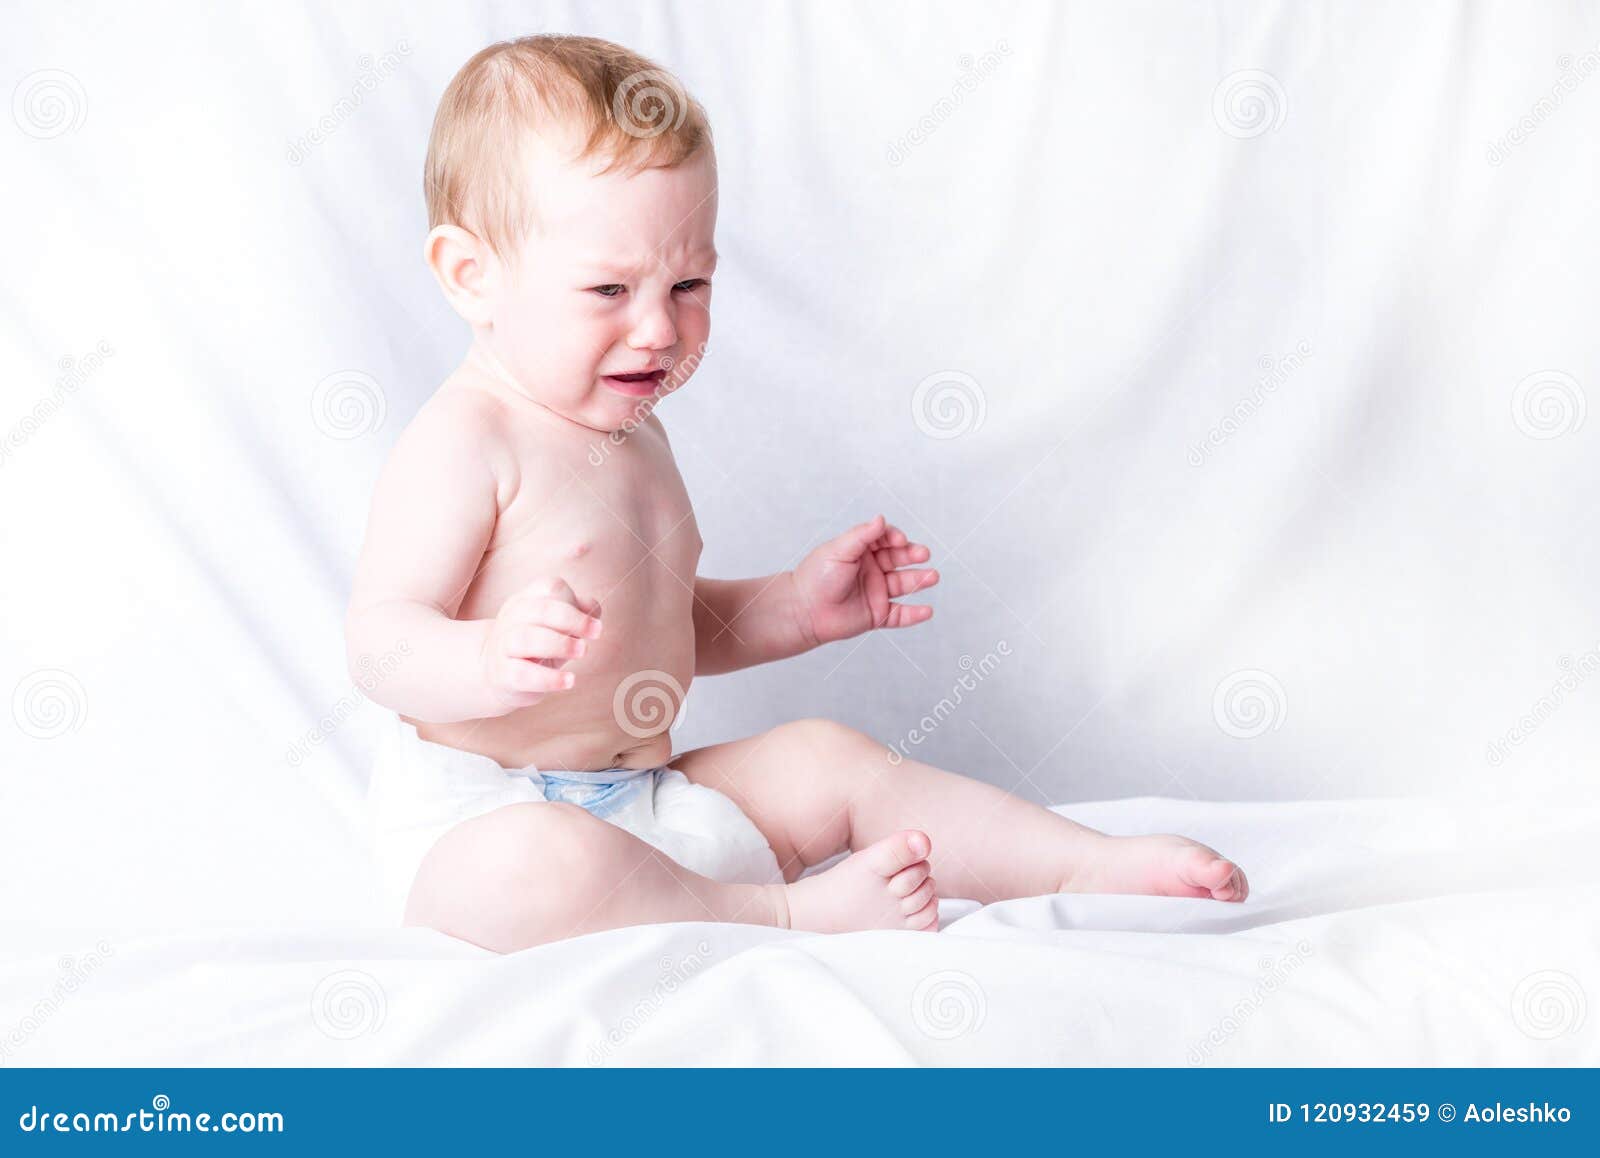  Cute  Baby  6 9 Months Old Sad Crying White Background  